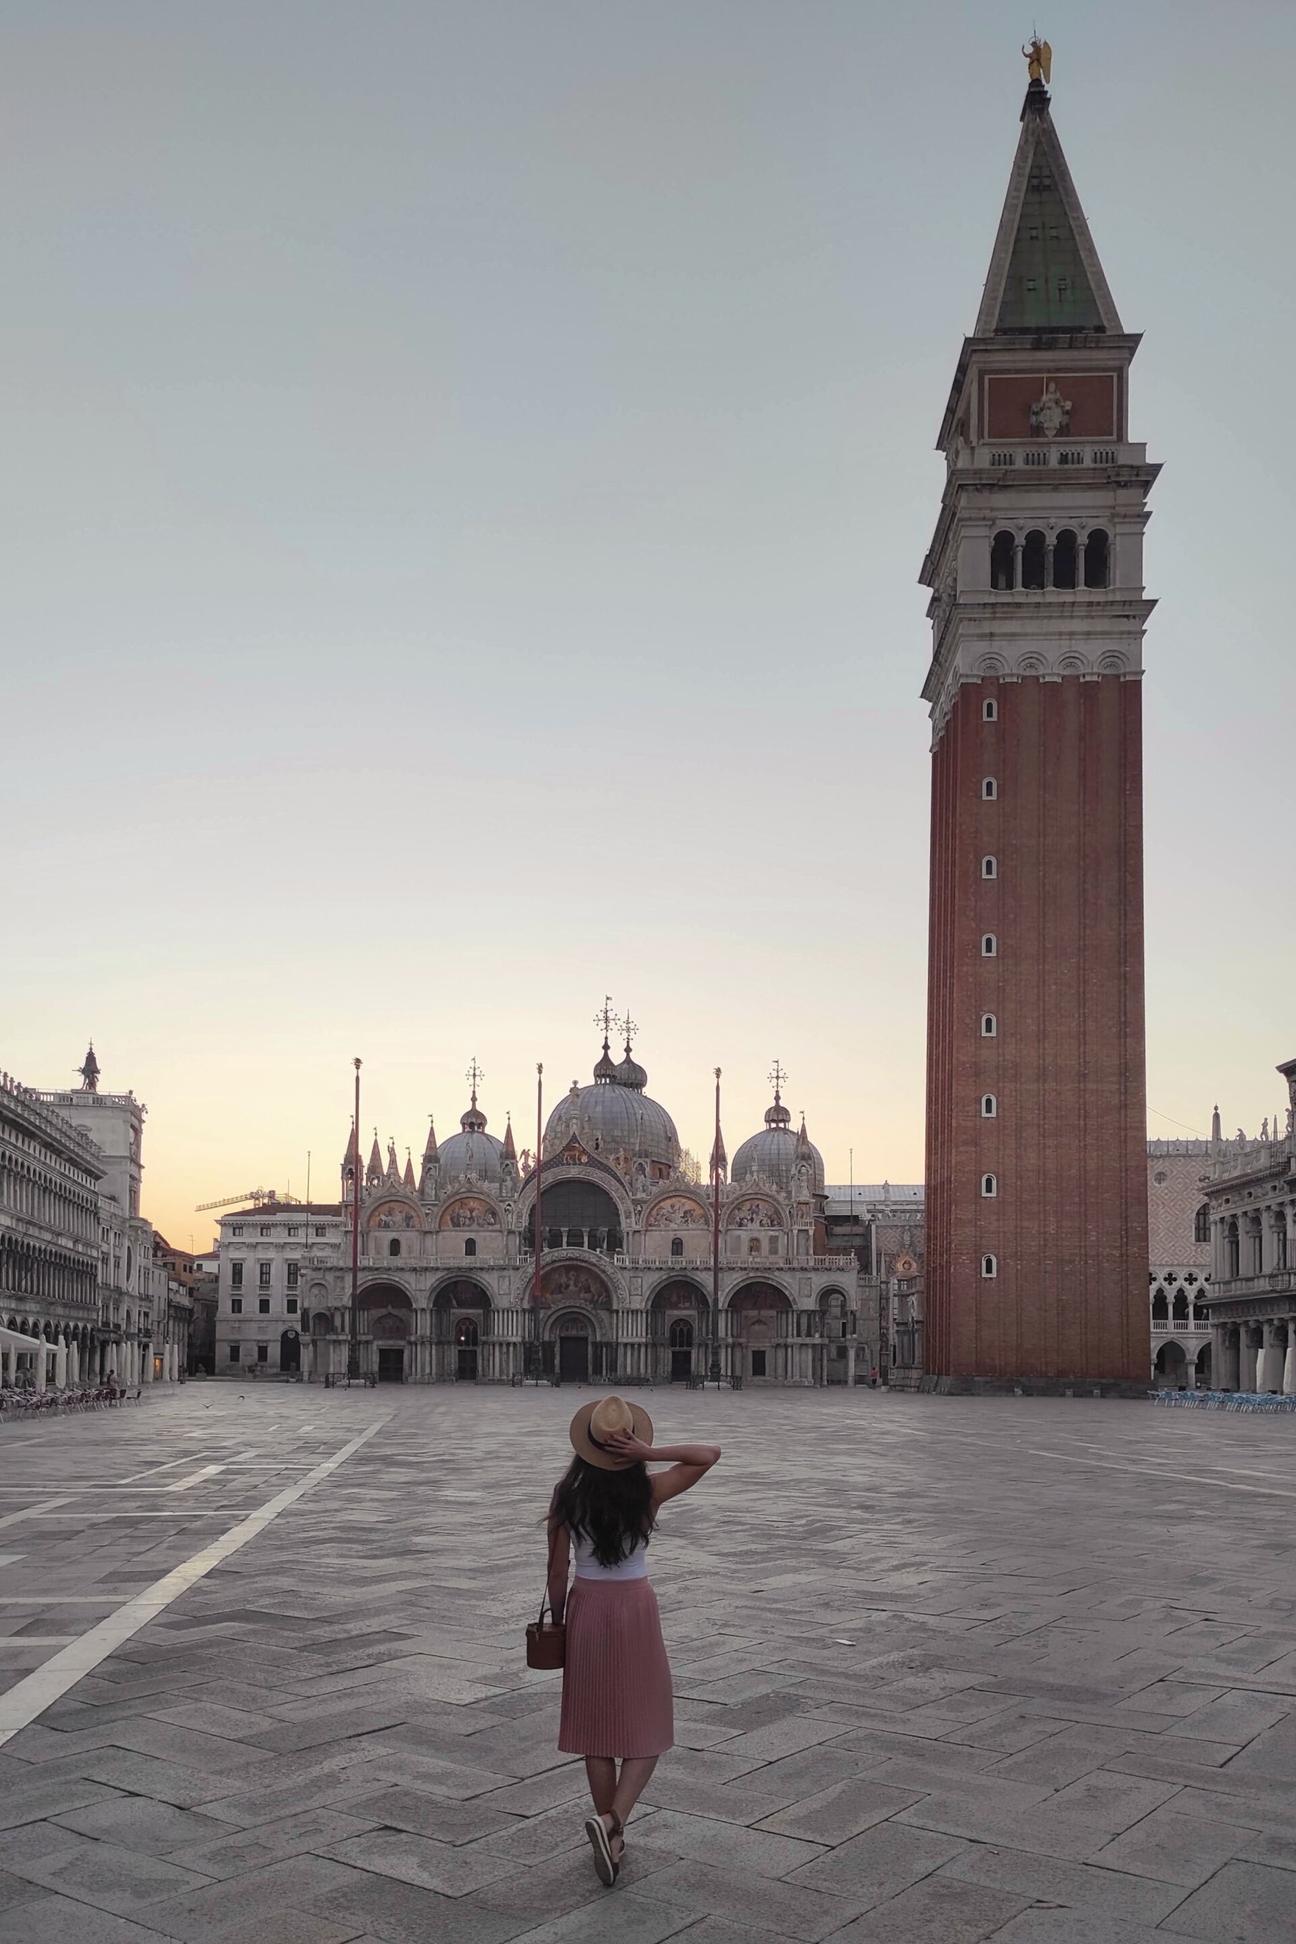 A photo of St Mark's Square (Piazza S. Marco)